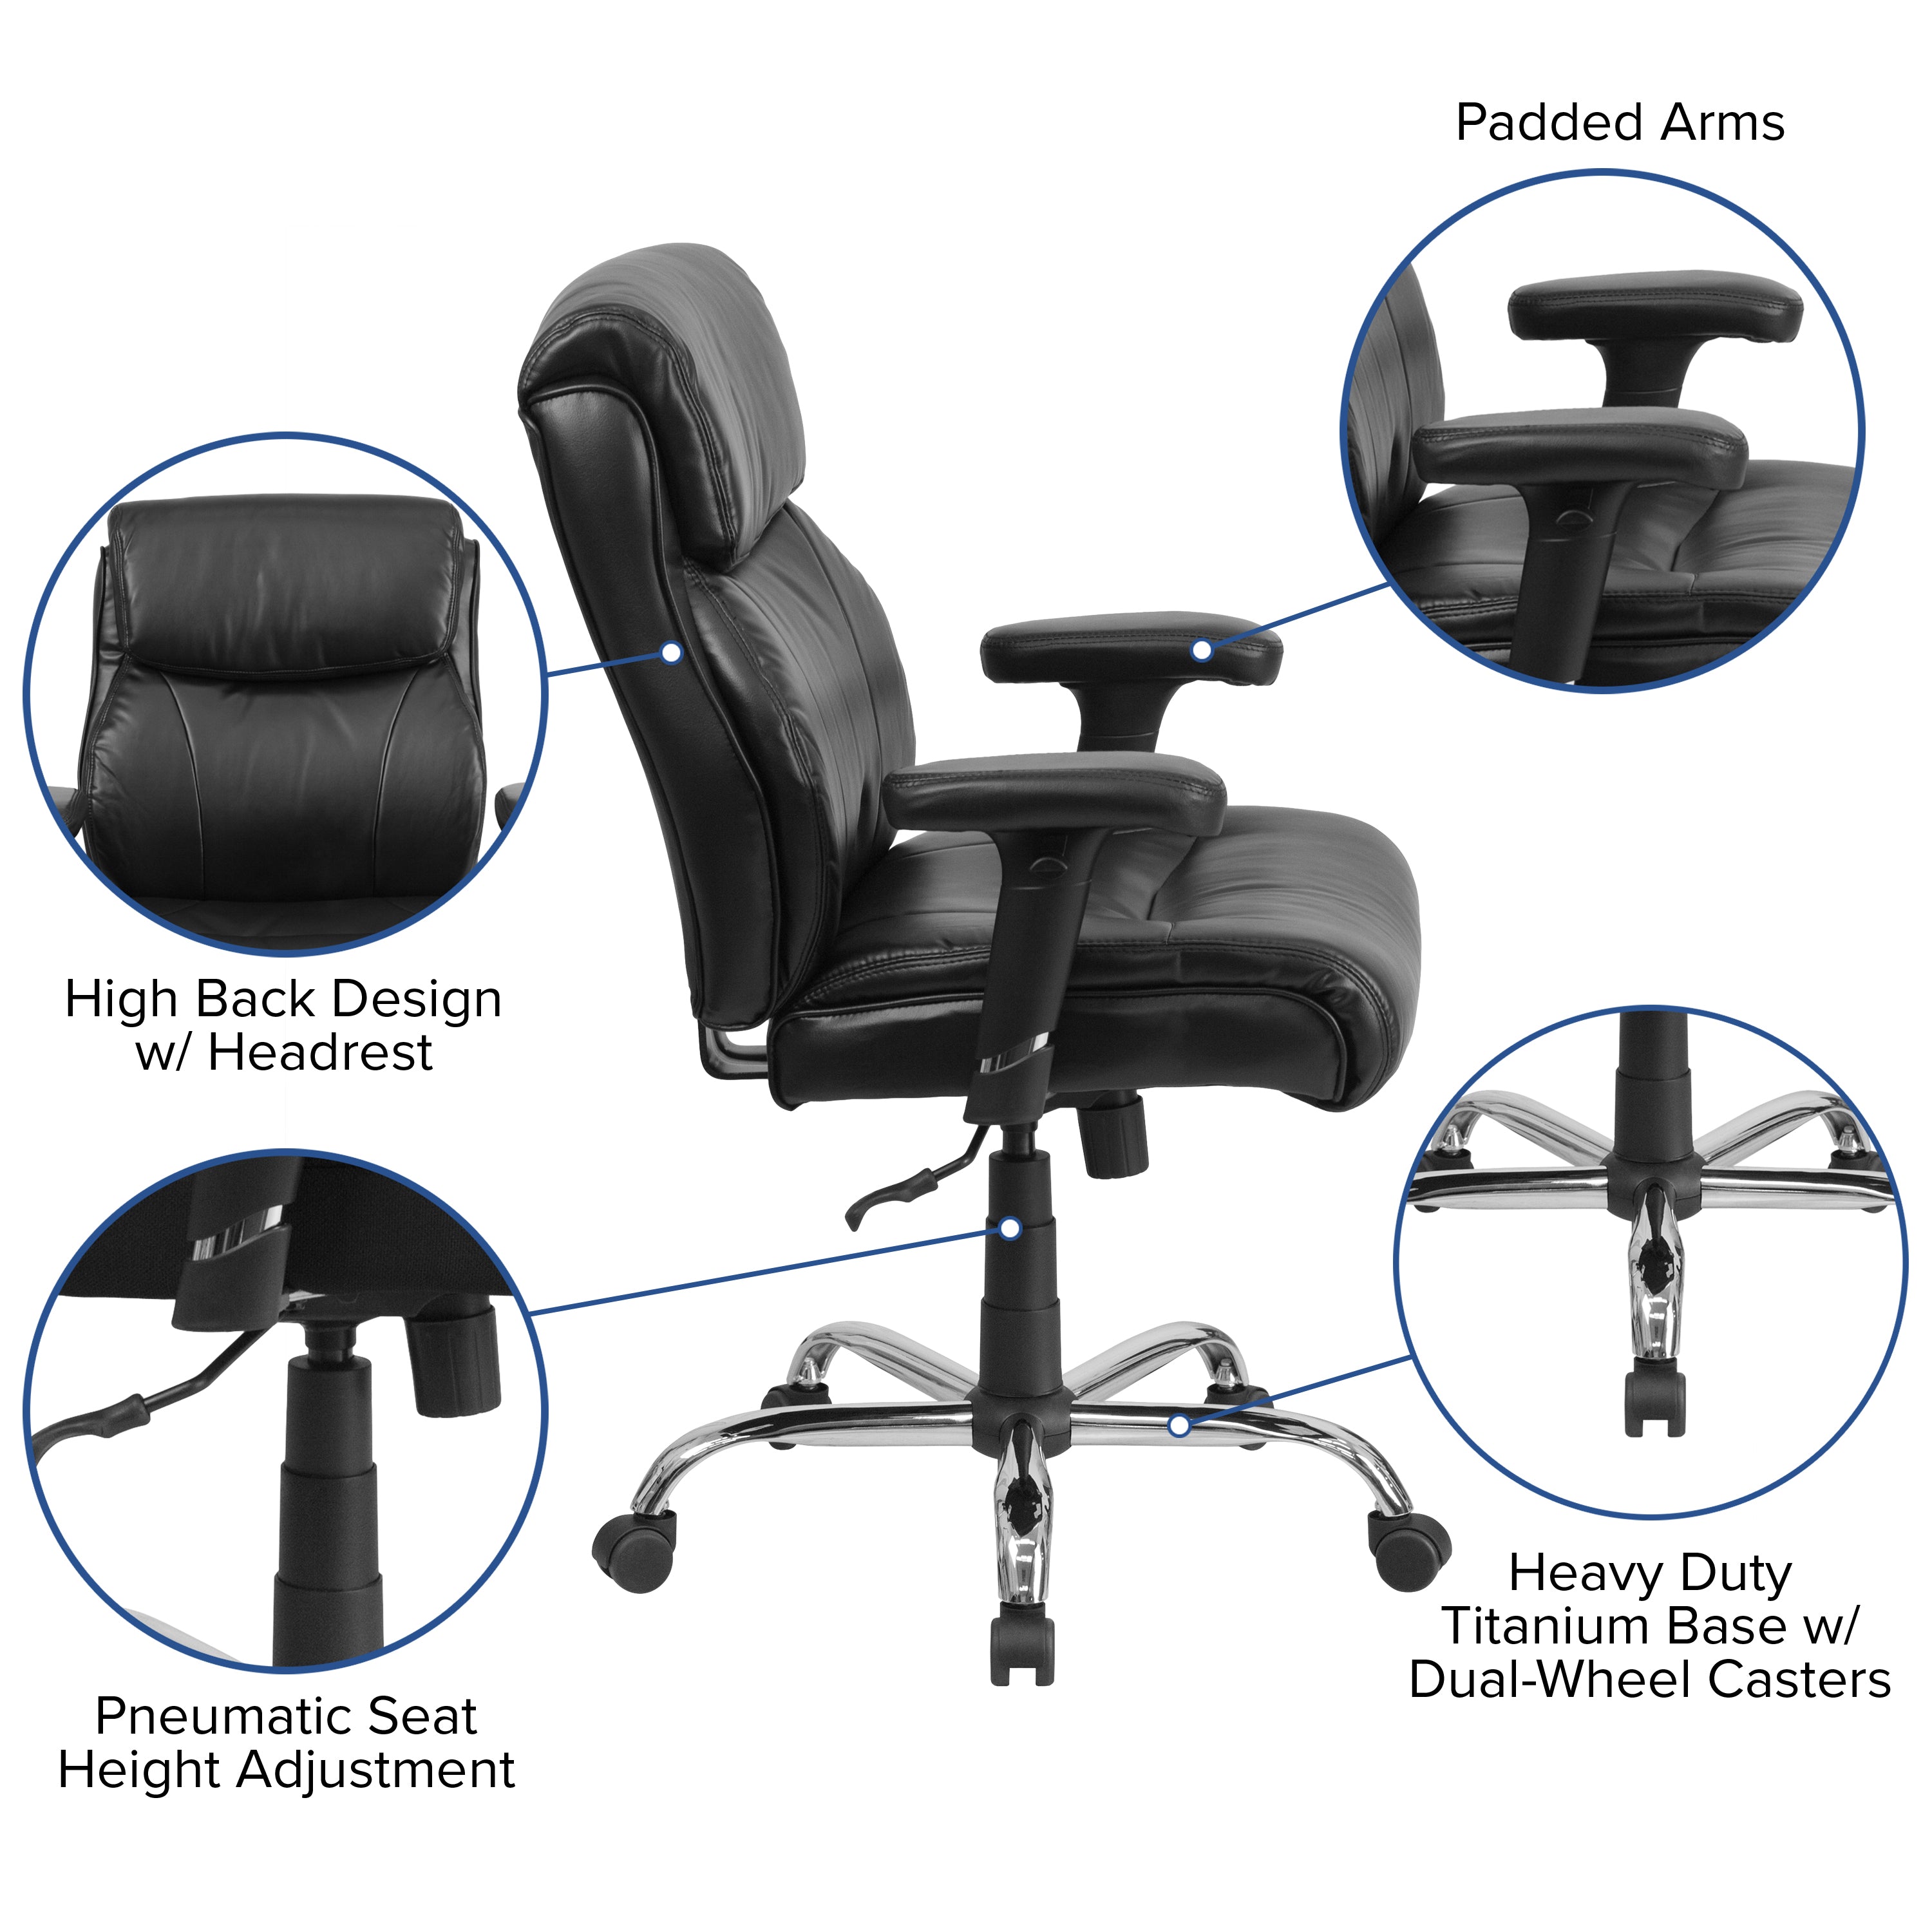 HERCULES Series Big & Tall 400 lb. Rated Swivel Ergonomic Task Office Chair with Clean Line Stitching and Adjustable Arms-Big & Tall Office Chair-Flash Furniture-Wall2Wall Furnishings